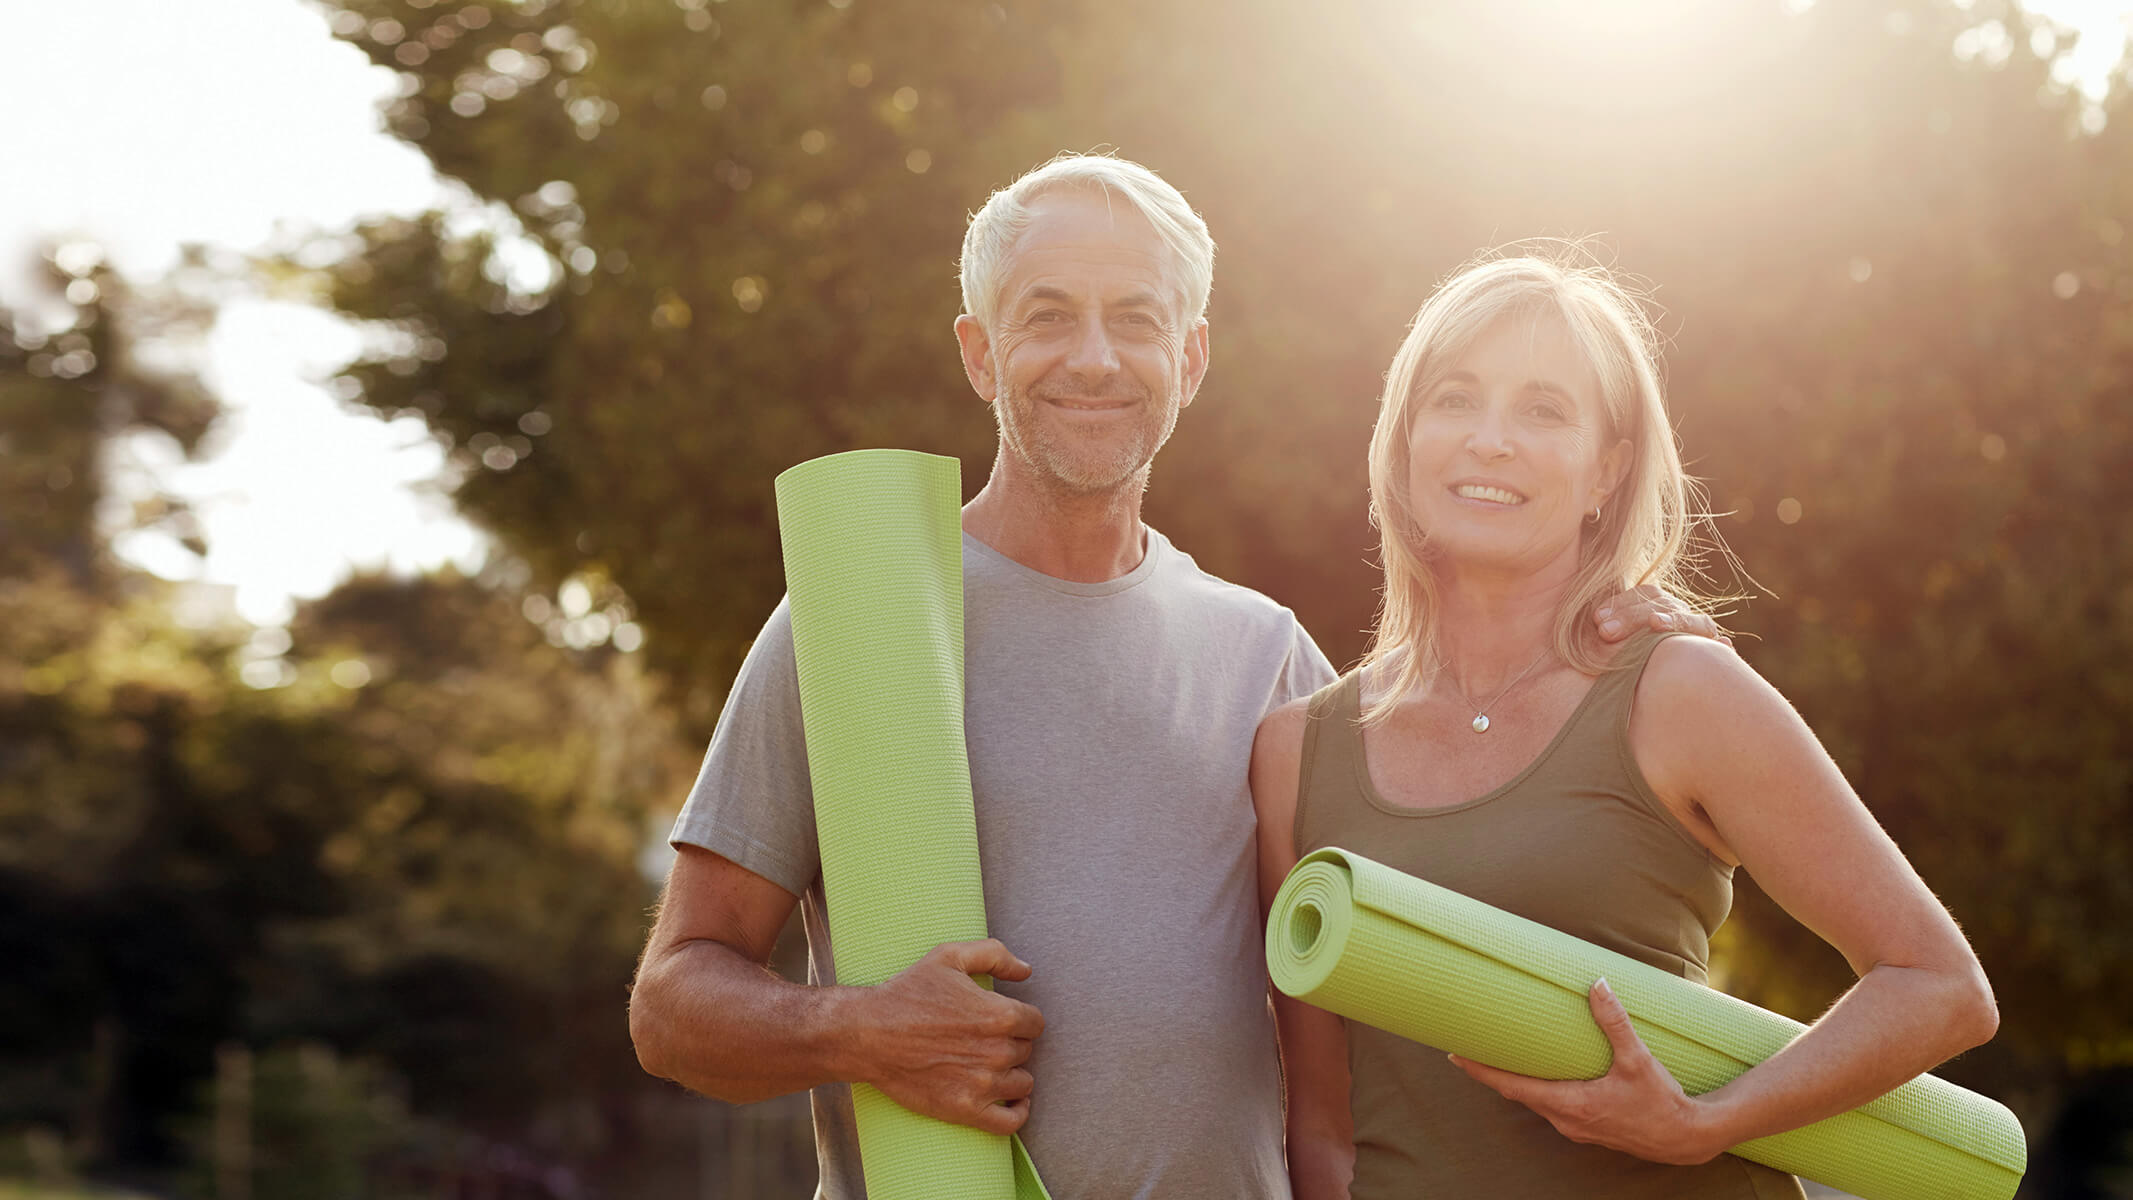 Healthy Living Through Community – Keeping Up With “Active” Homebuyers